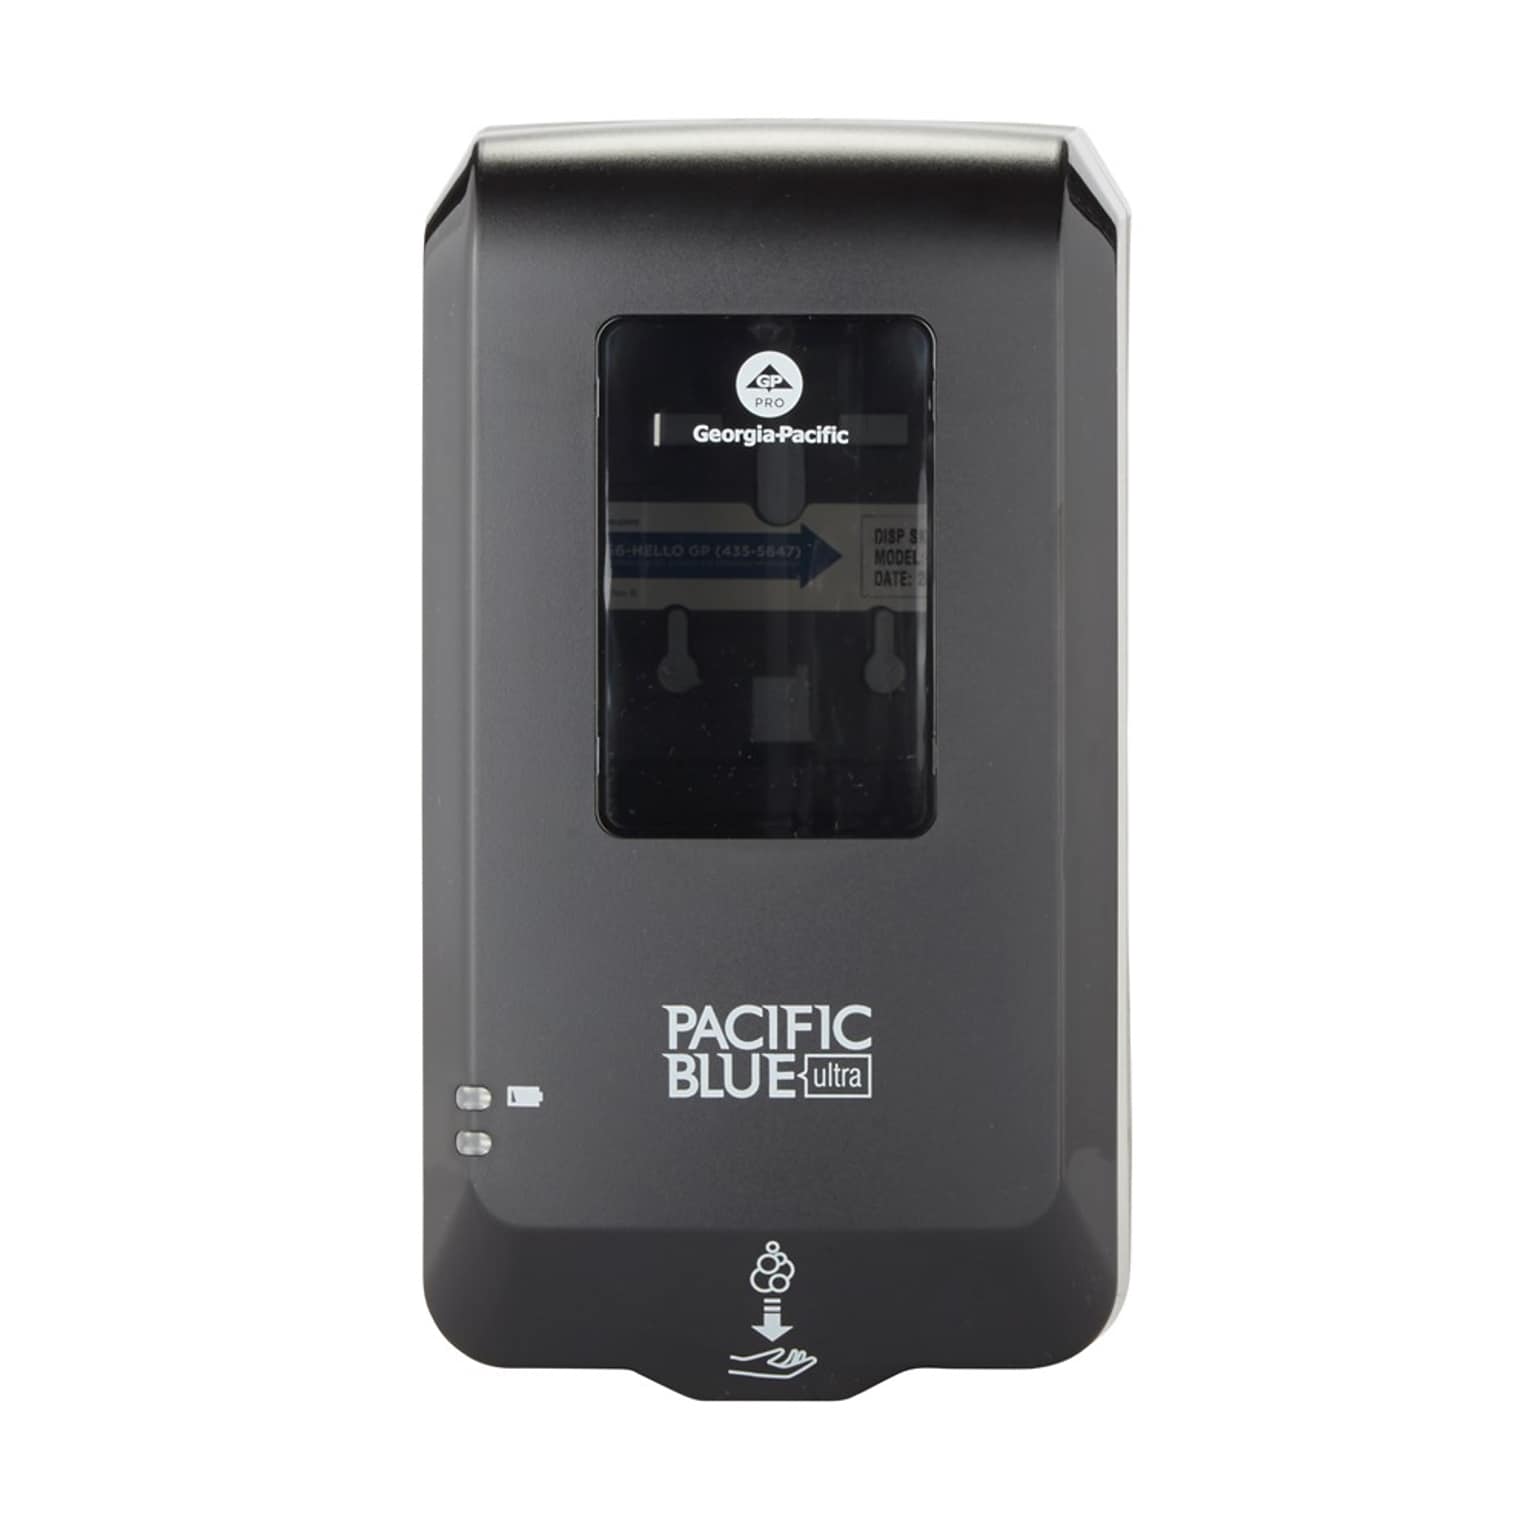 Pacific Blue Ultra Automated Touchless Soap & Sanitizer Dispenser, Black (GPC53590)